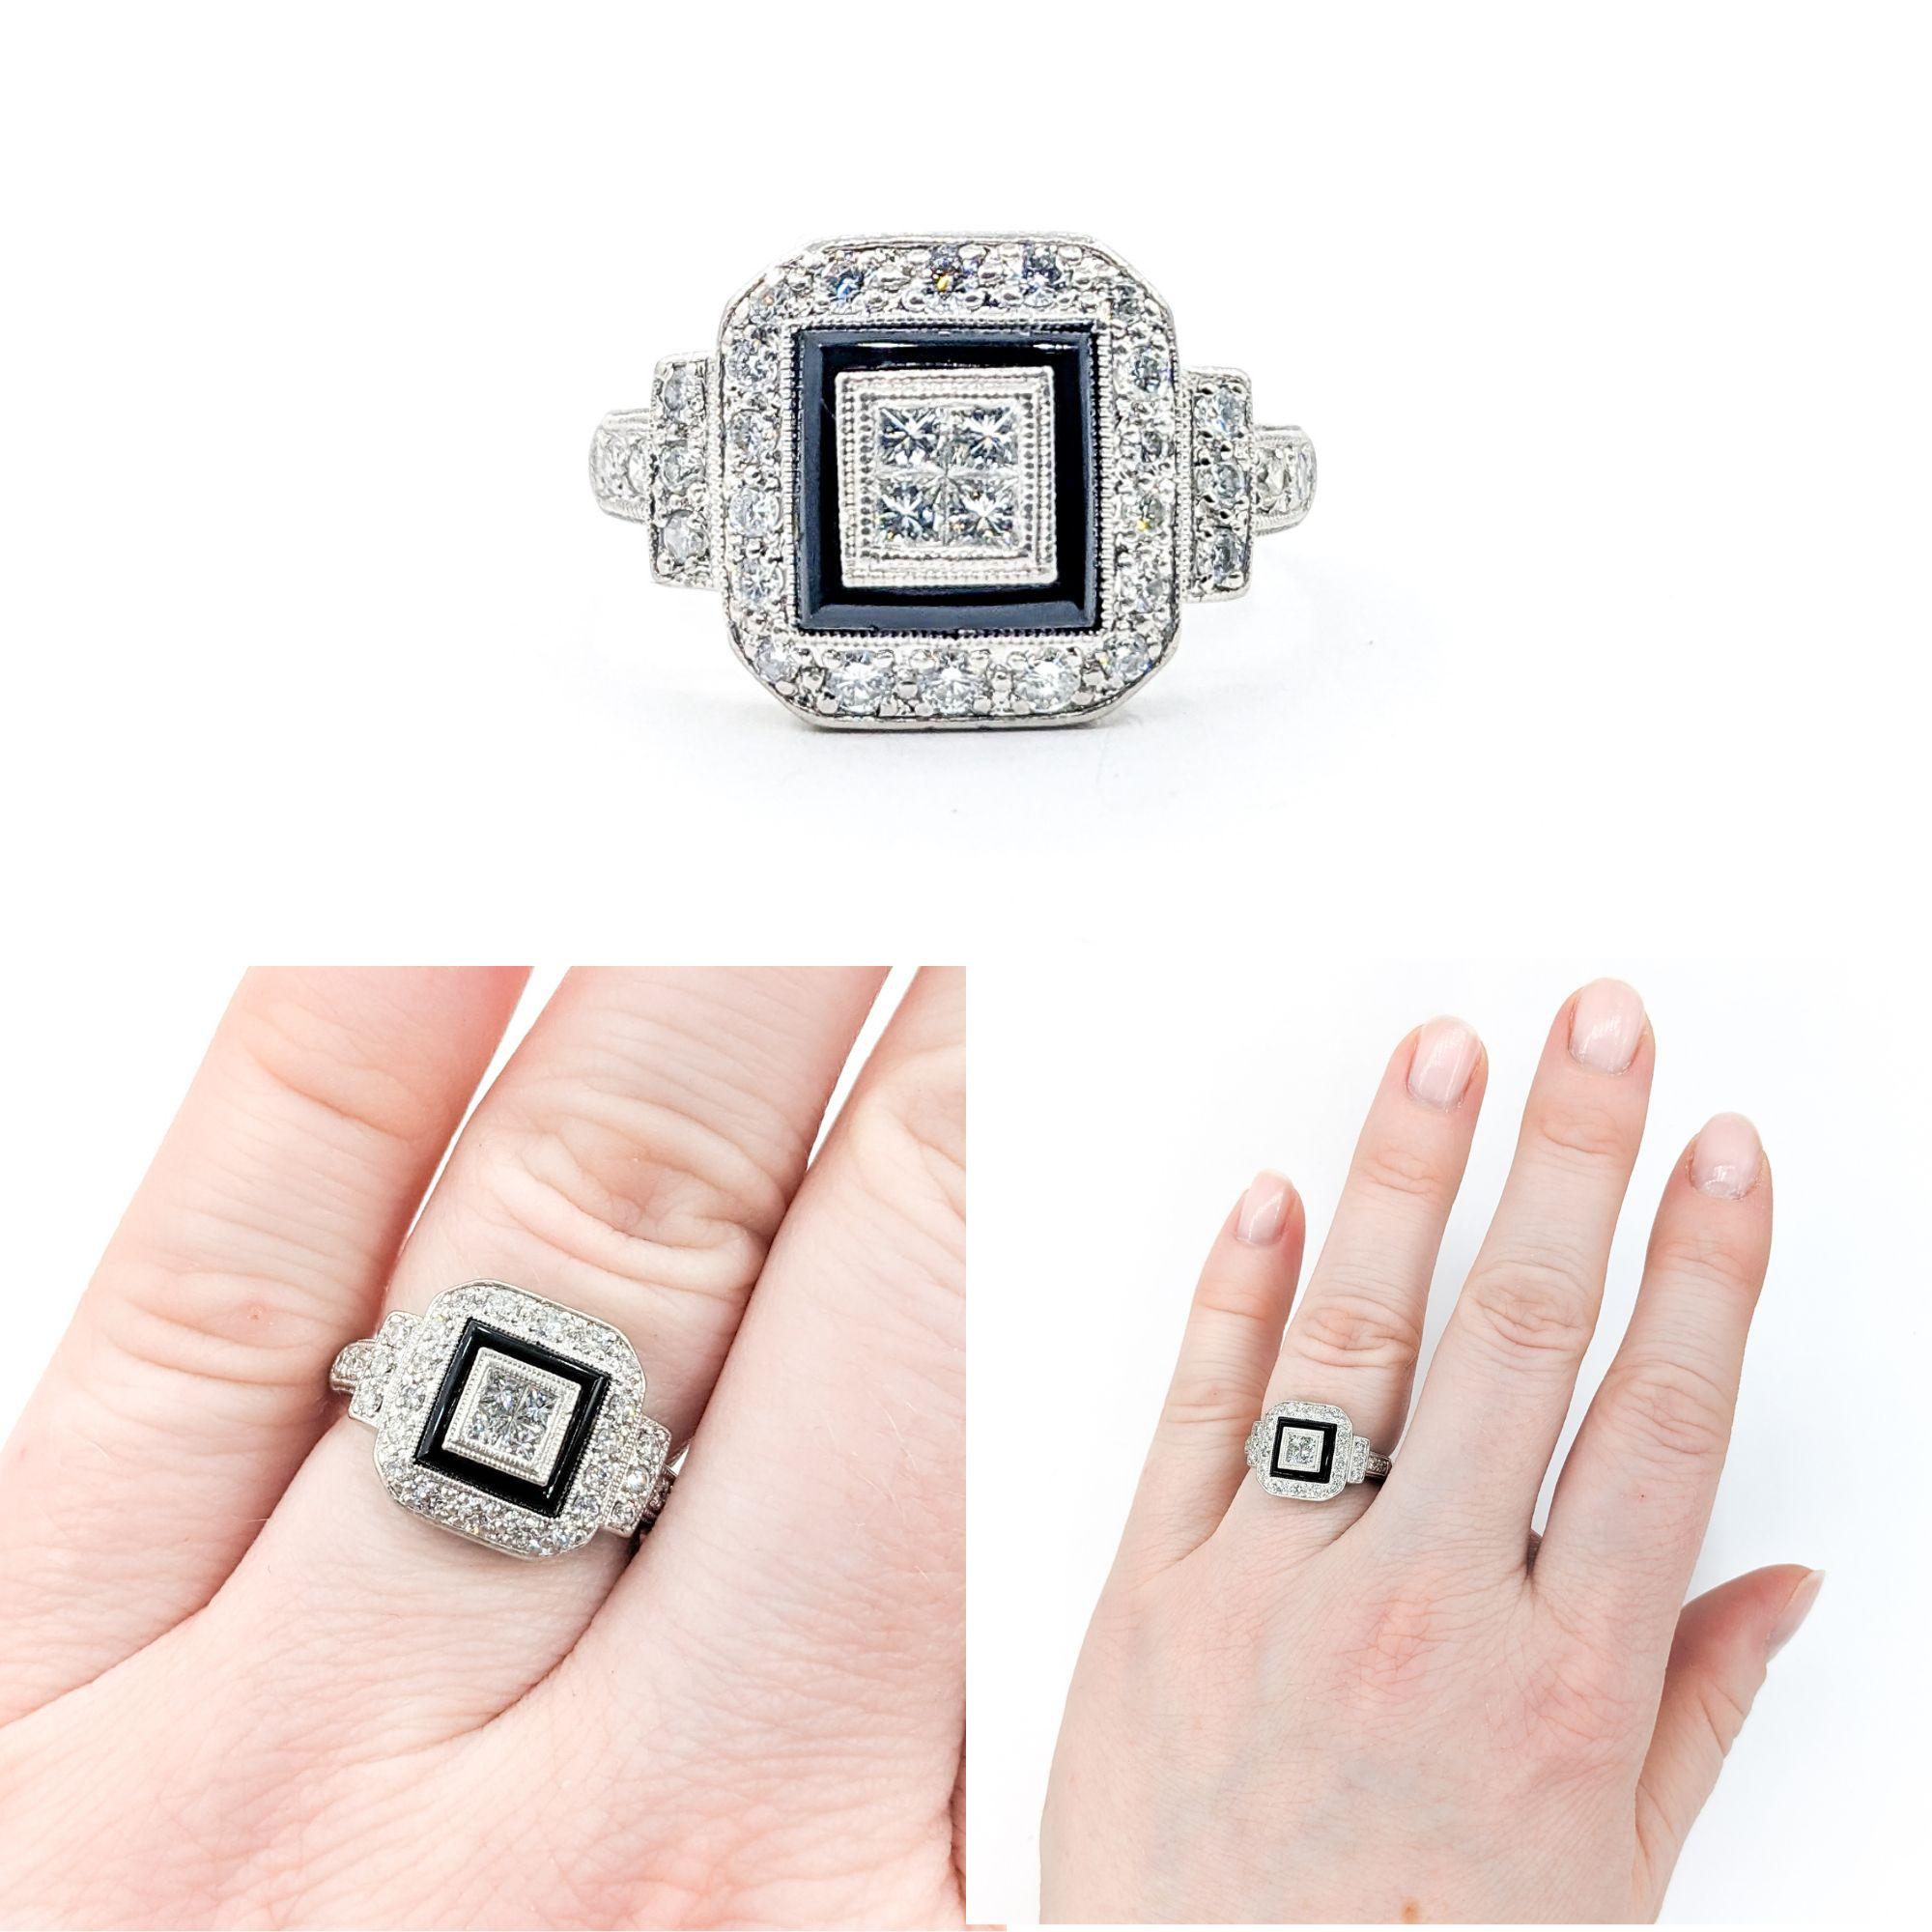 Black Enamel & Diamond Ring In 950pt Platinum

Introducing a stunning Diamond Fashion Ring, masterfully crafted in 950pt Platinum. This exquisite ring features .50ctw Diamonds, beautifully complemented by a striking 8x8mm Black Enamel accent,